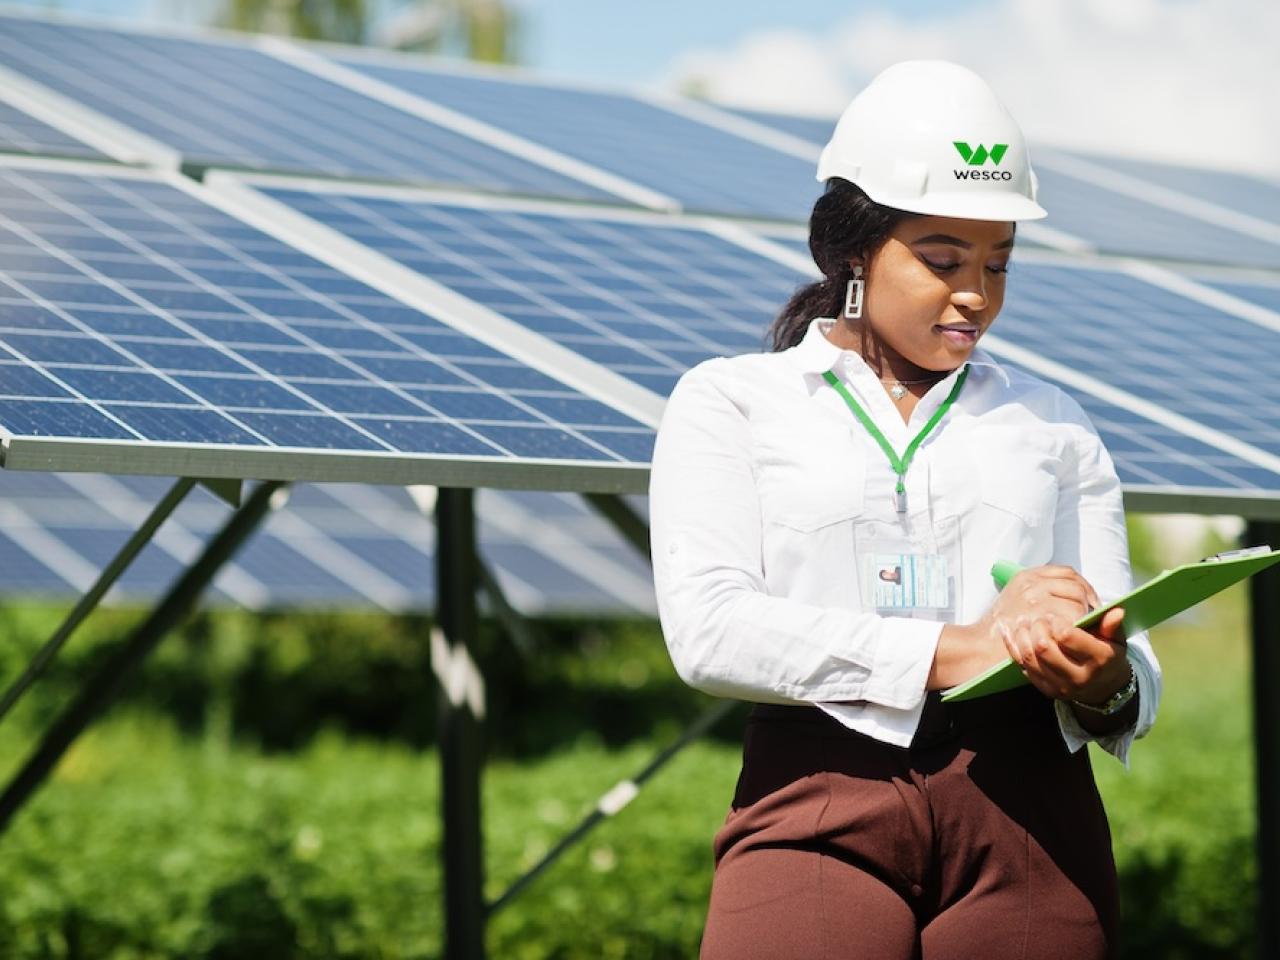 Female Wesco employee shown with a clipboard in front of a solar panel array.